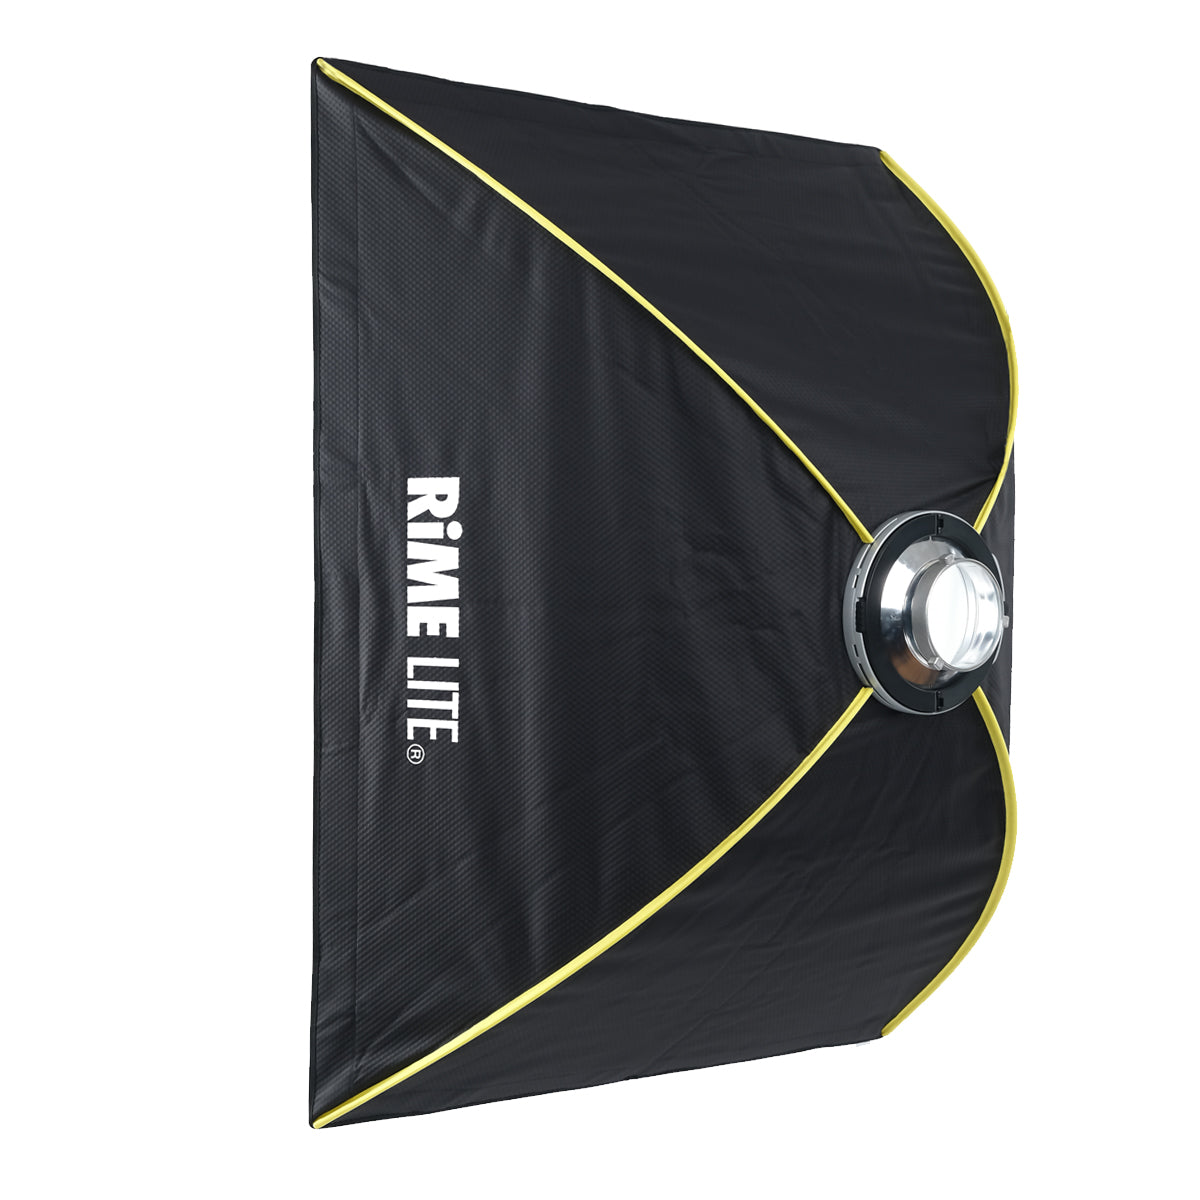 RimeLite OneTik Recta 75x100cm SoftBox with Bowens Speed Ring Adapter